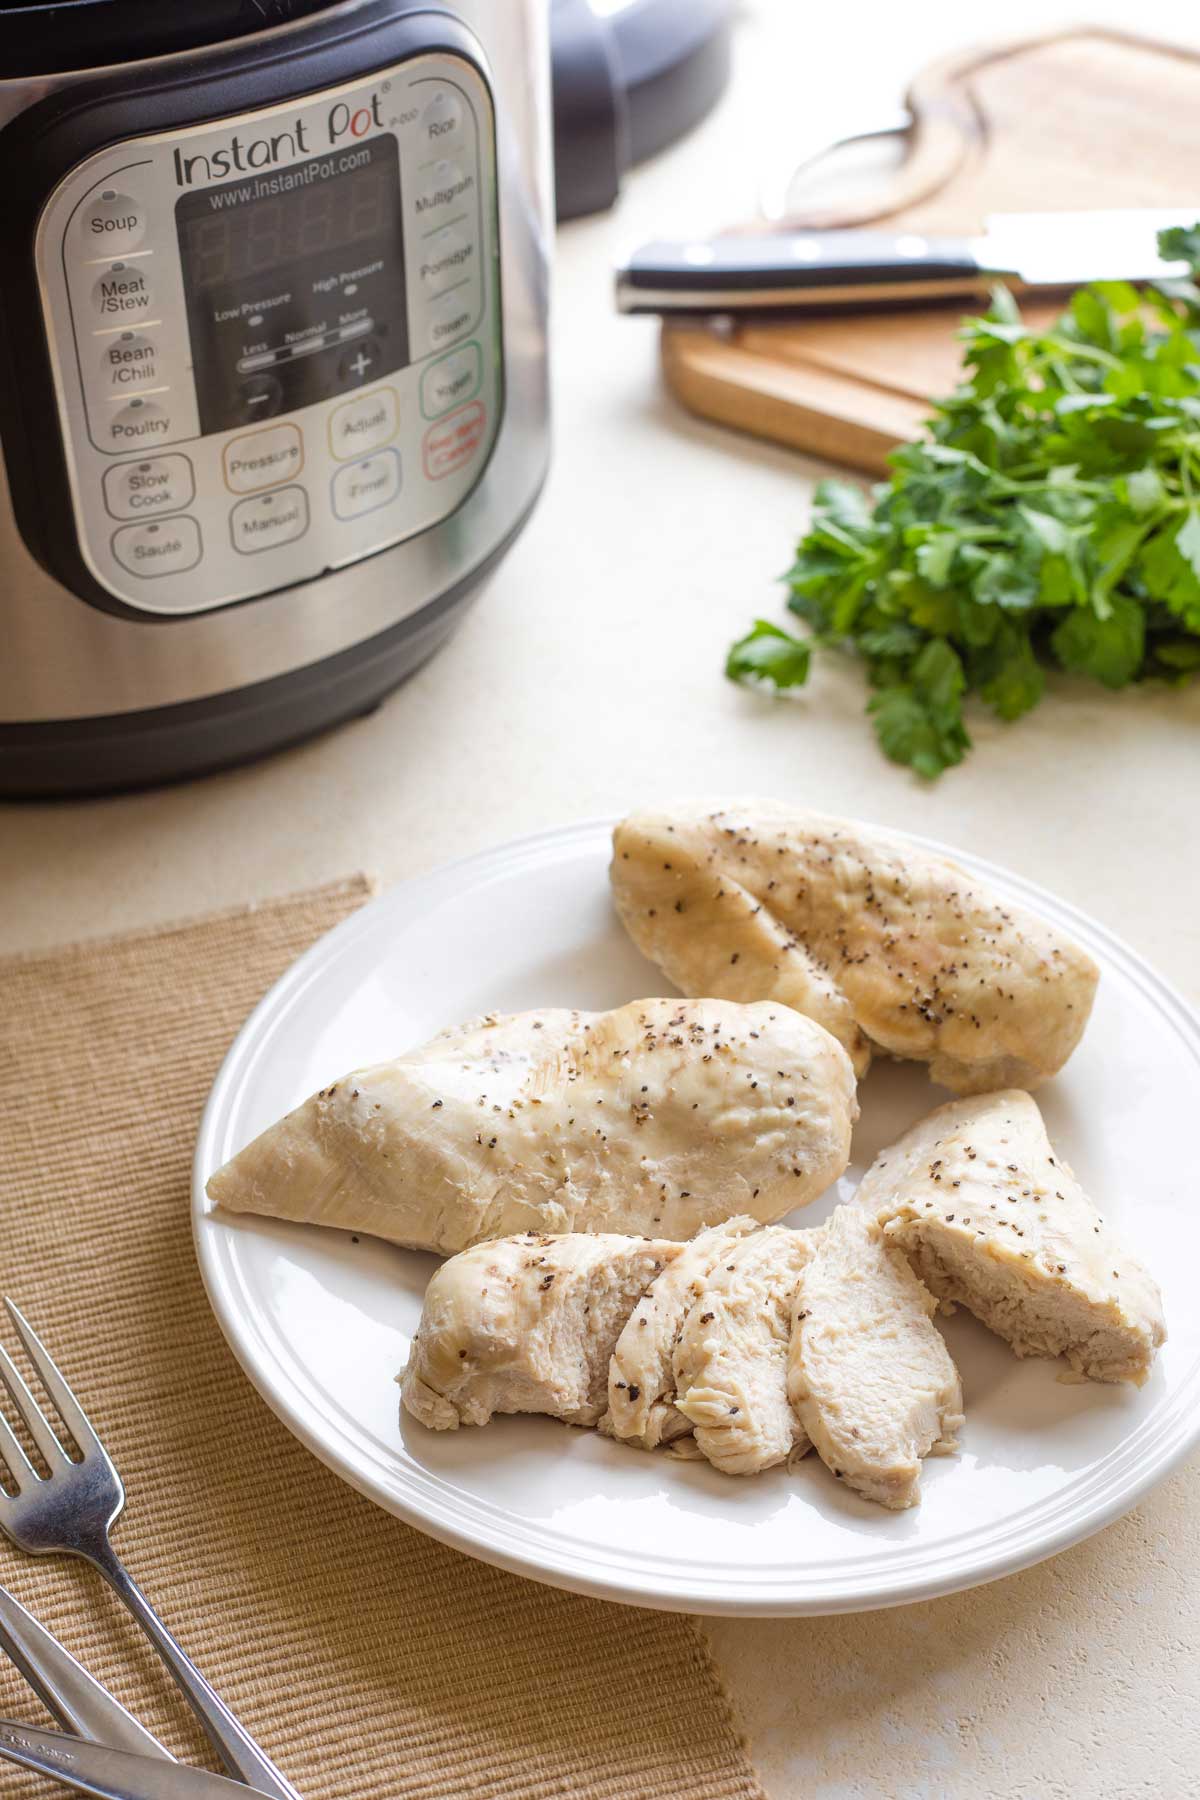 Cooked chicken breasts on white dinner plate (1 sliced) with placemat, forks, Instant Pot and parsley surrounding.